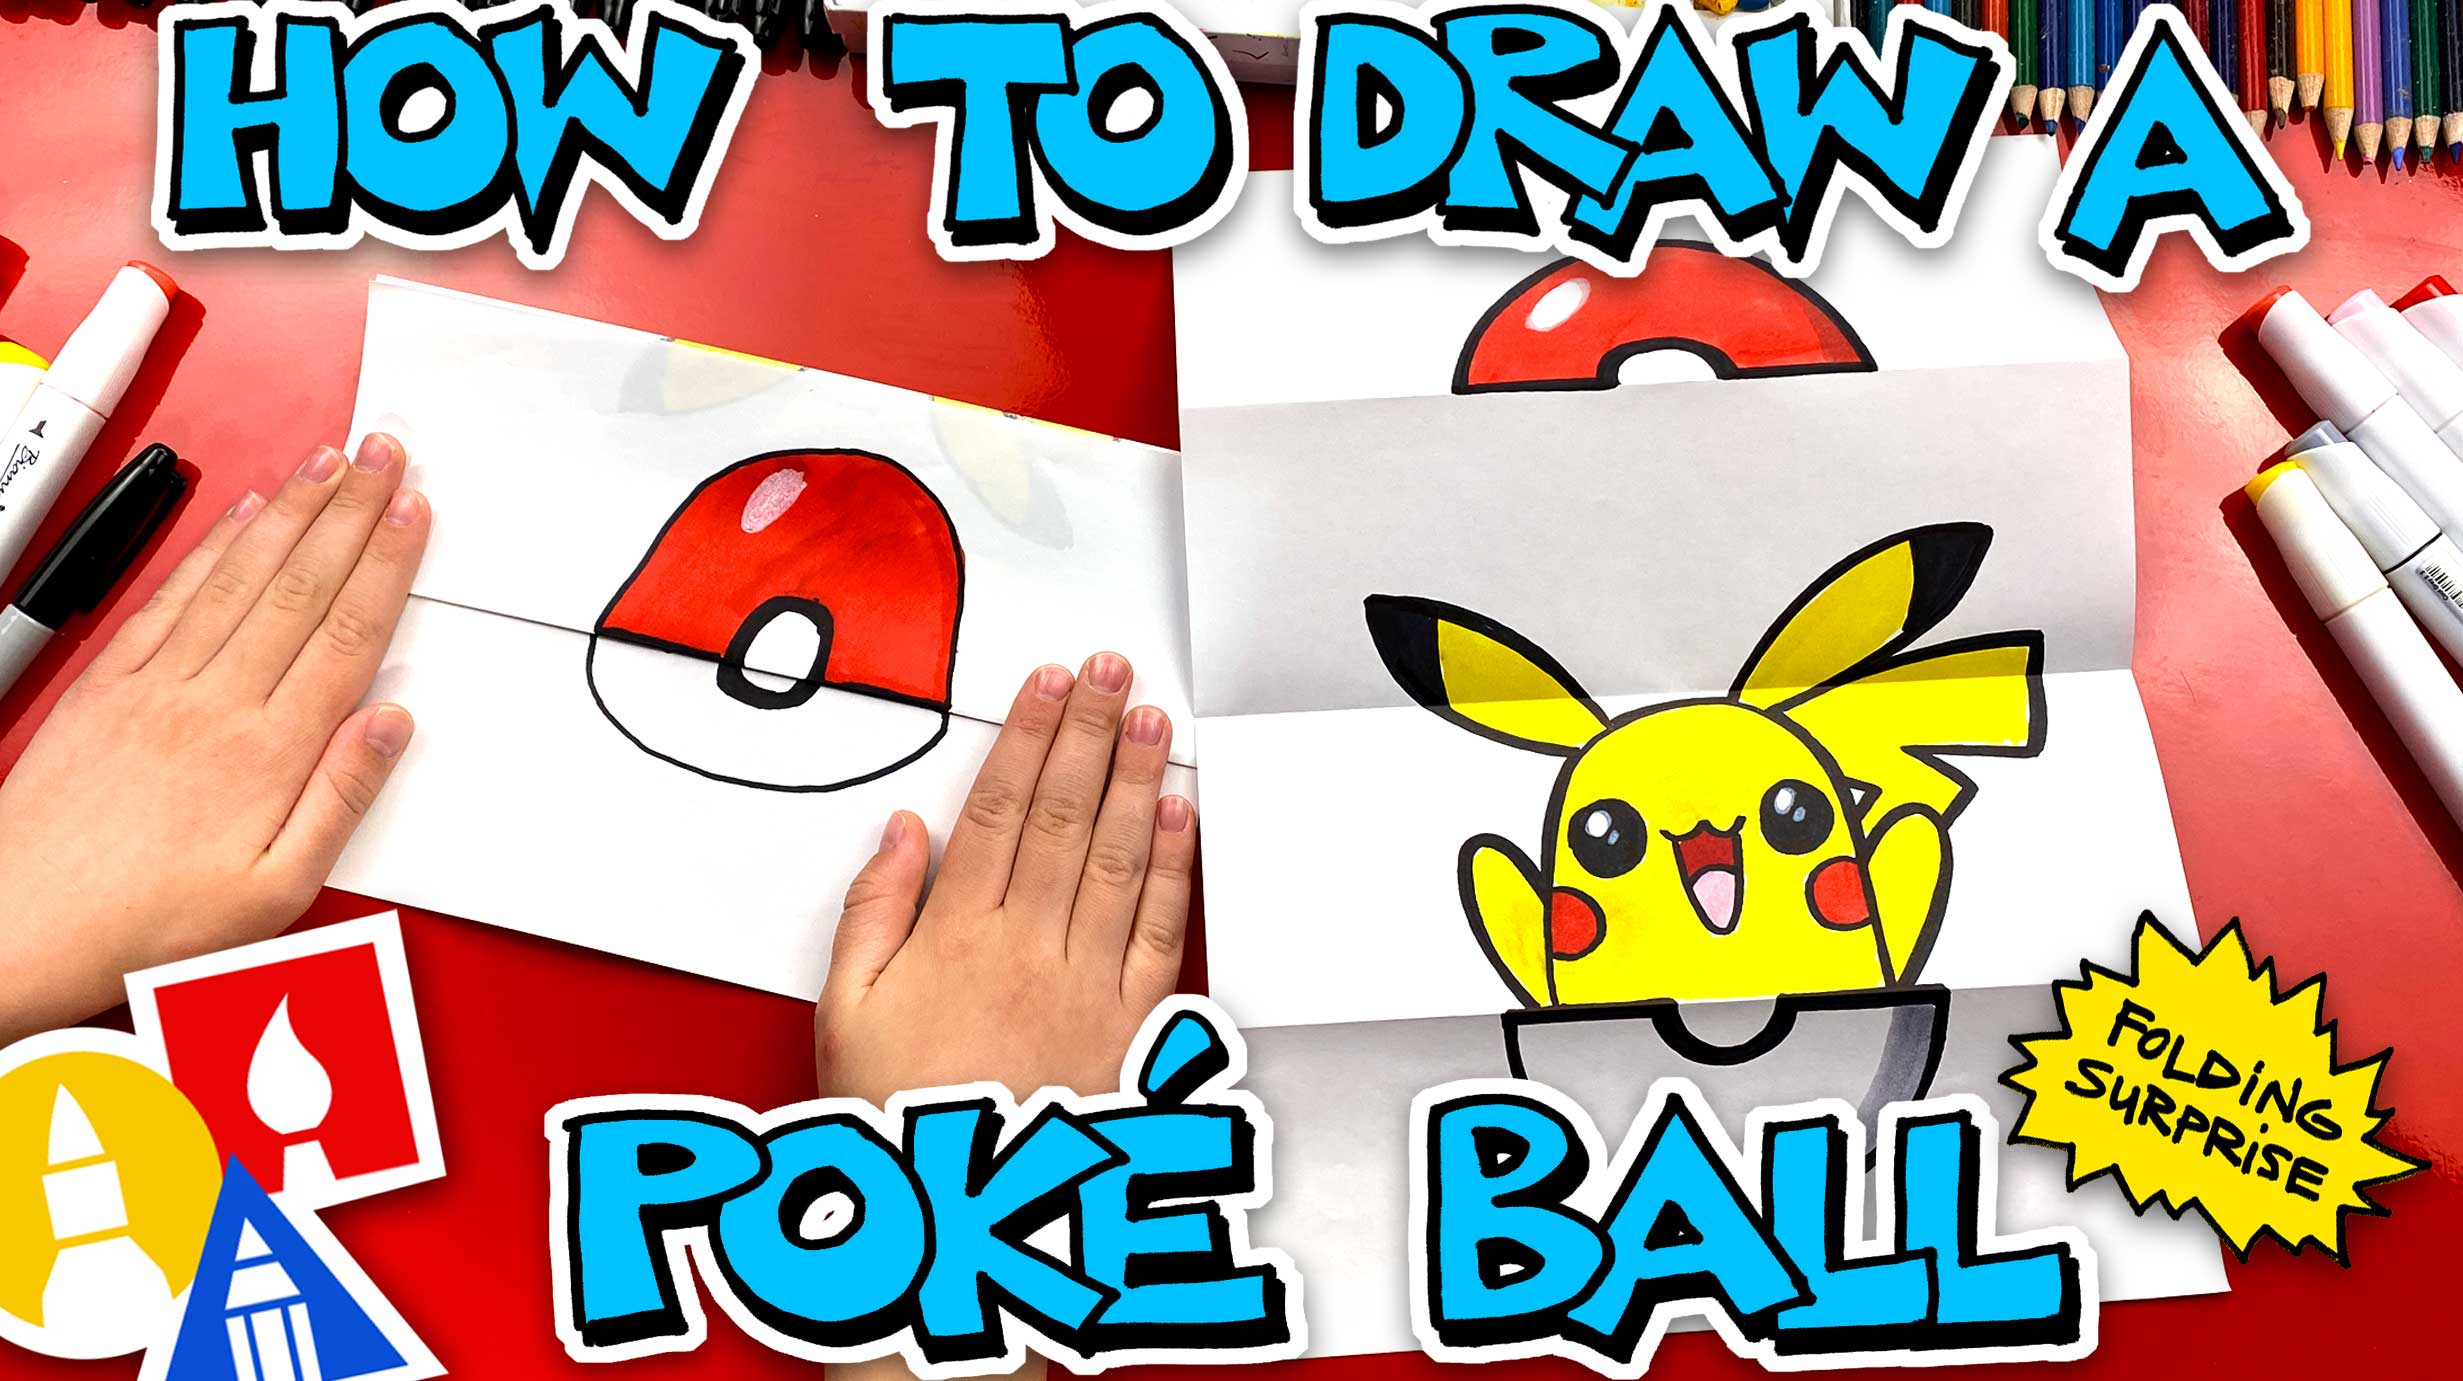 How To Draw A Poke Ball Folding Surprise Art For Kids Hub I started drawing from scratch. to draw a poke ball folding surprise